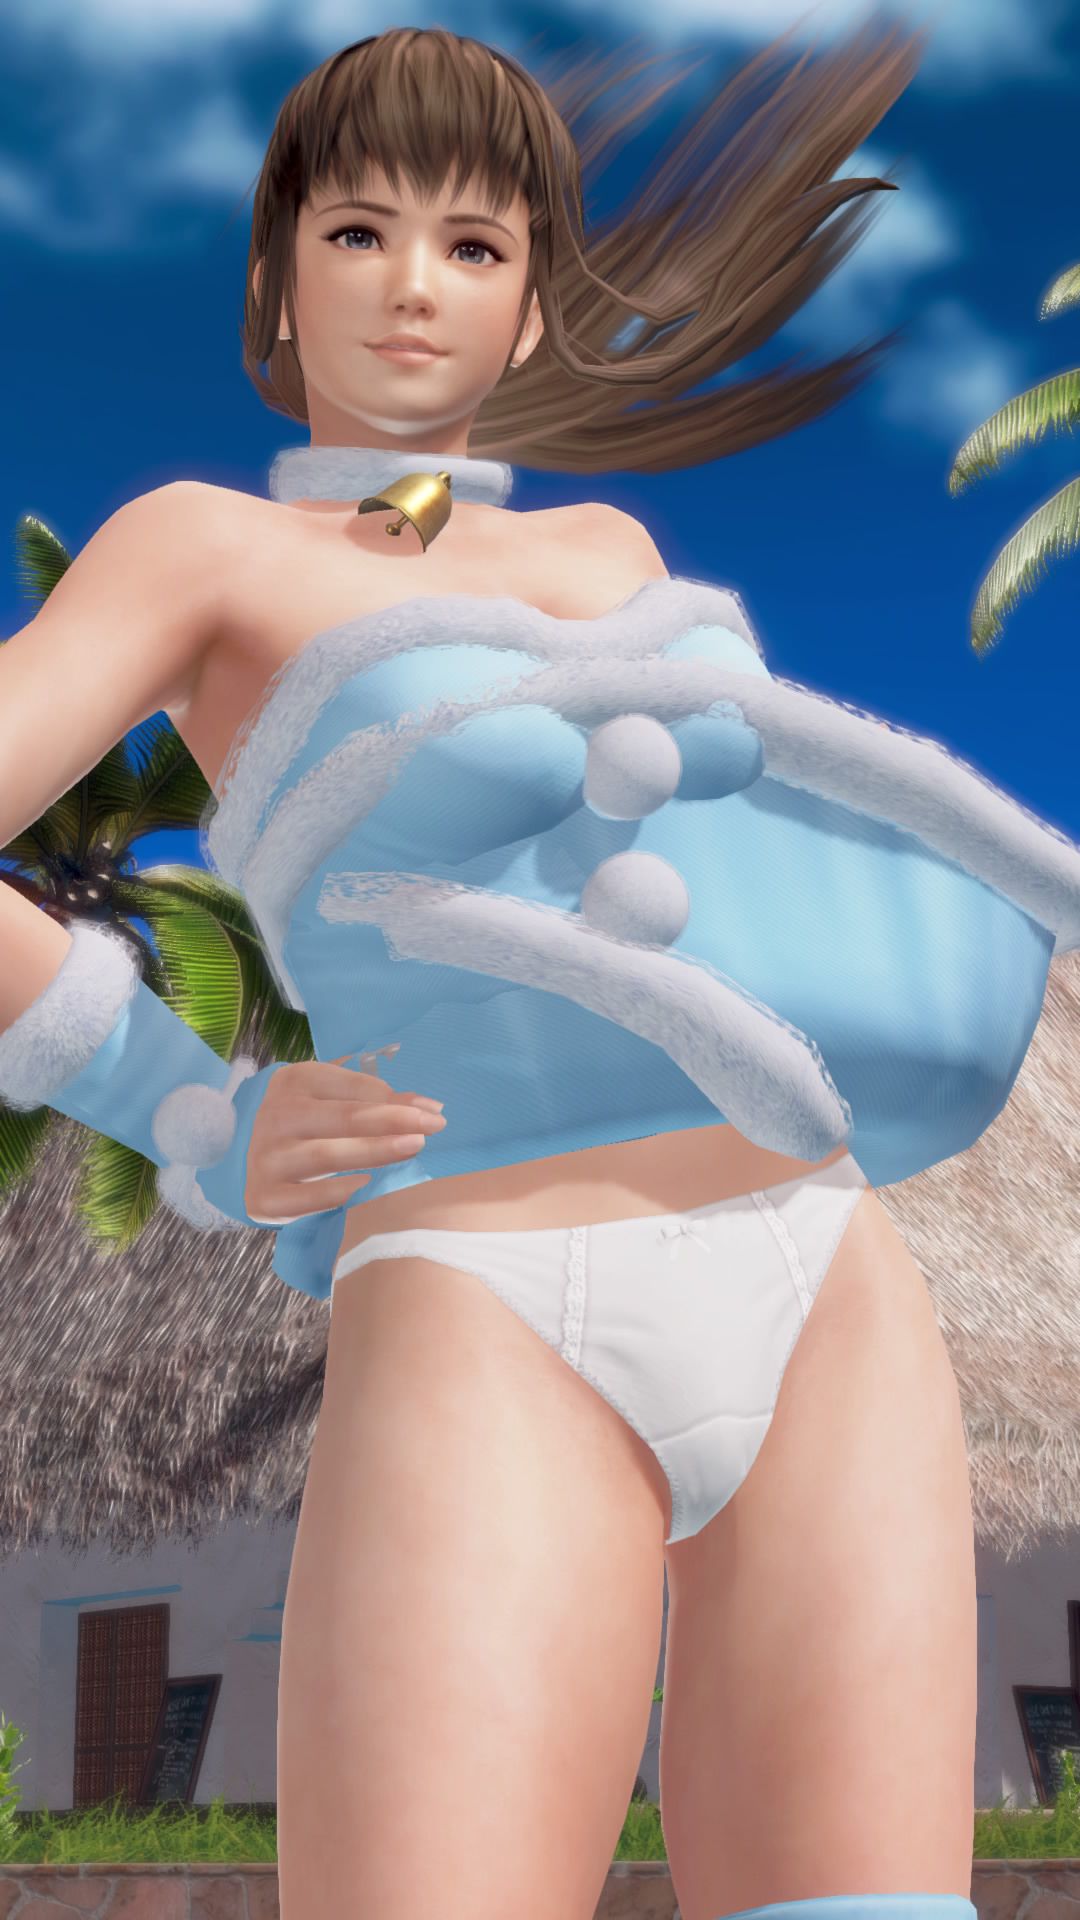 Merry Xmas from DOAX3 South Island! Photo session with new swimsuit Santa 14